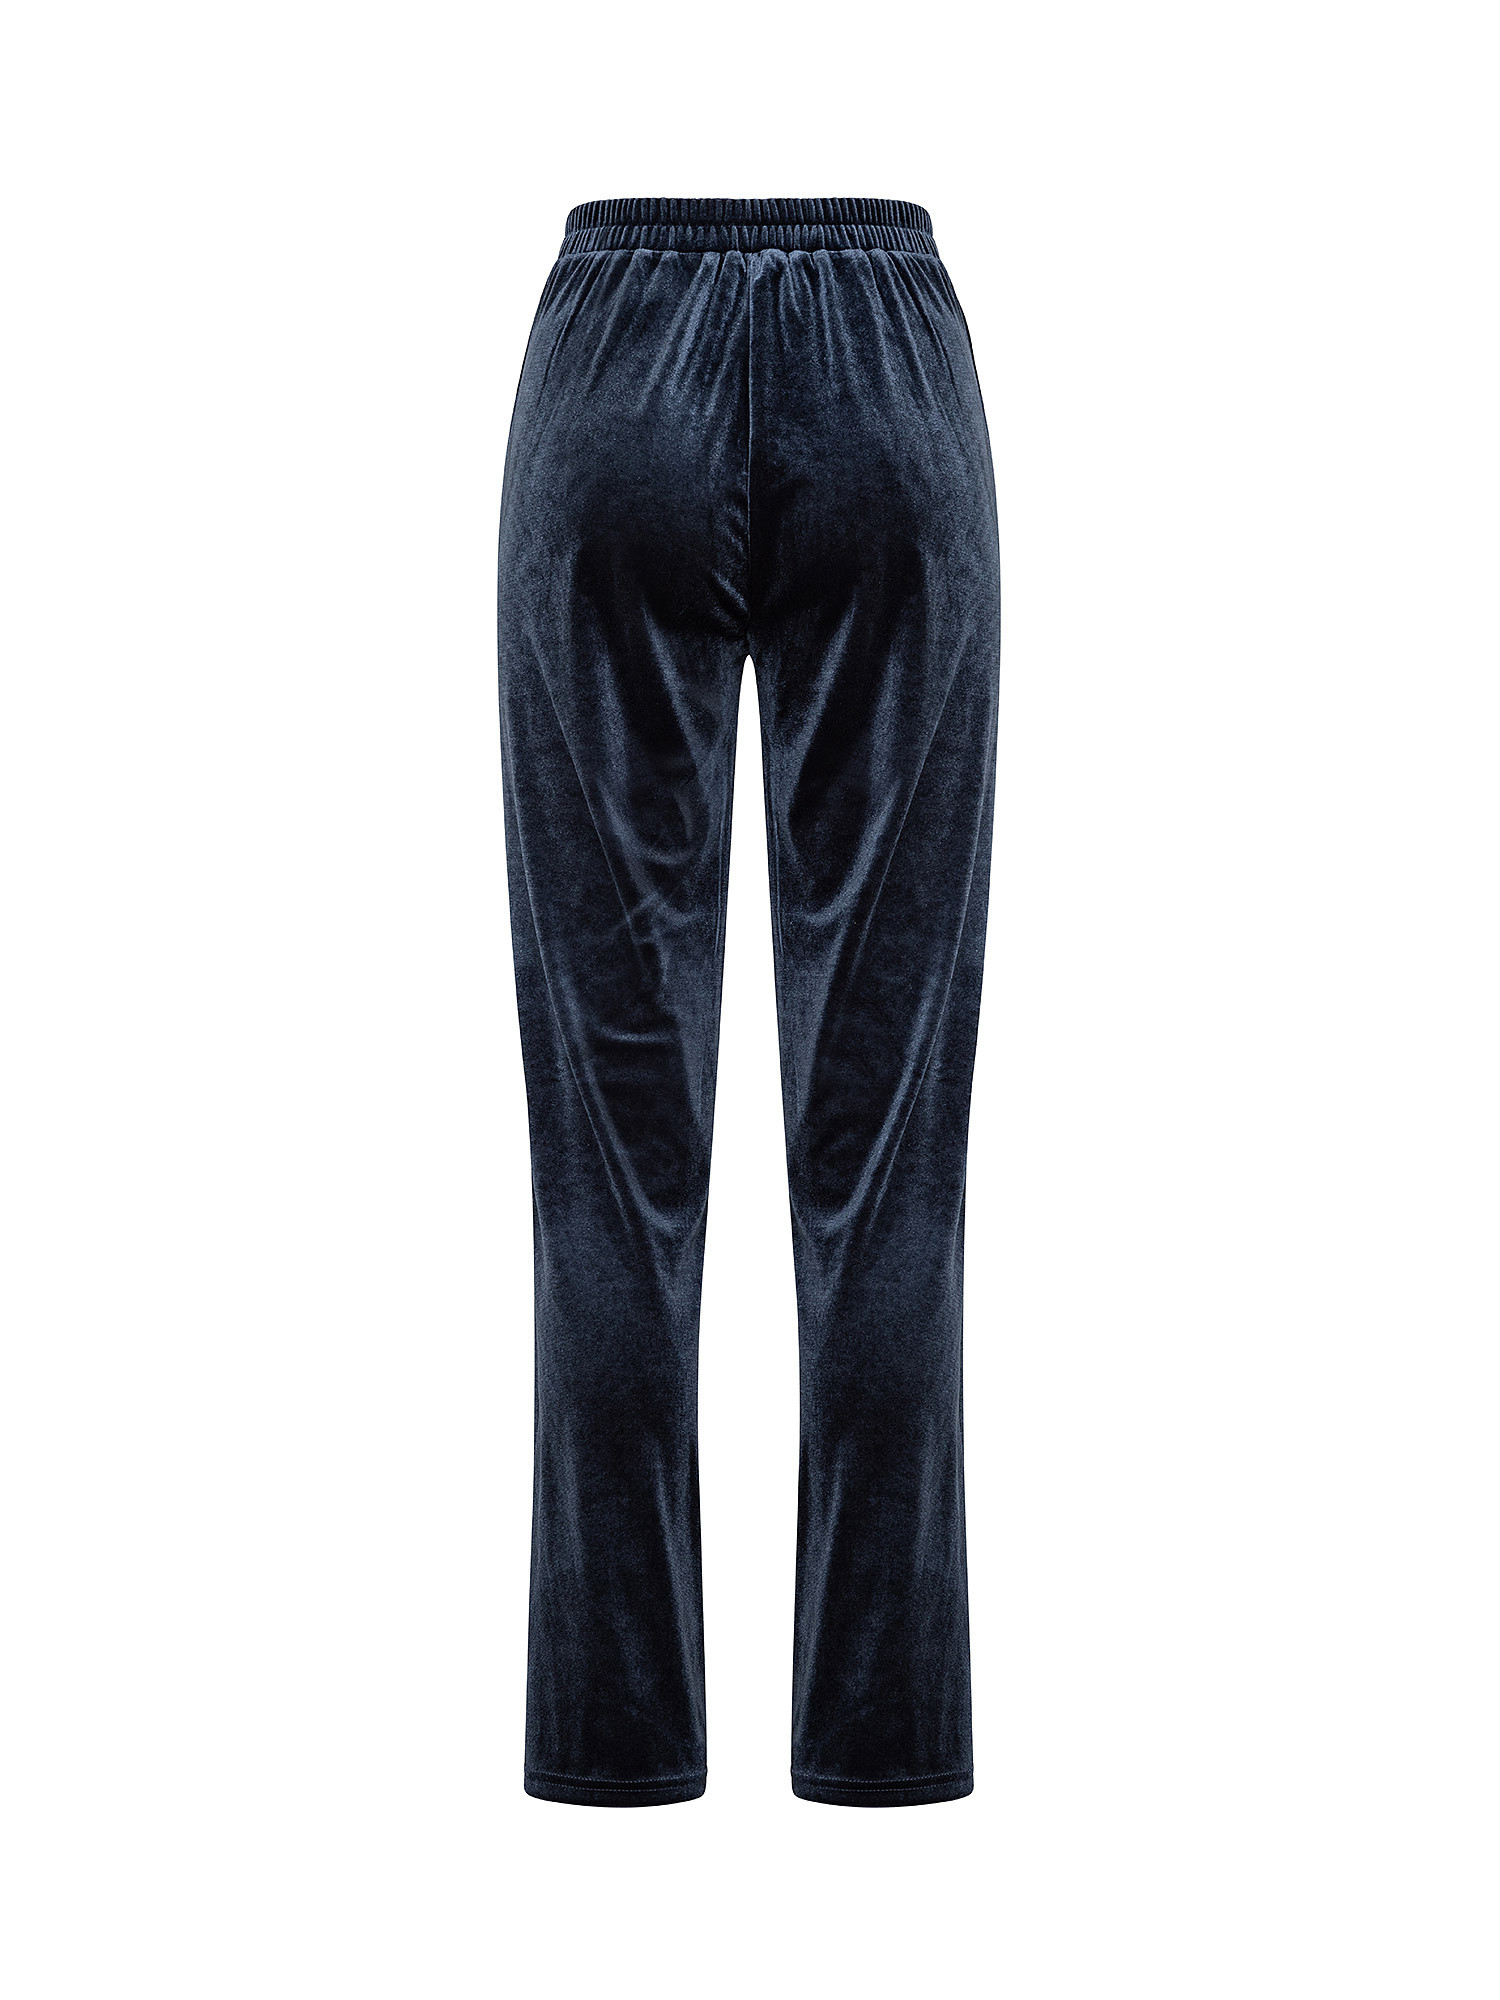 Chenille trousers, Blue, large image number 1